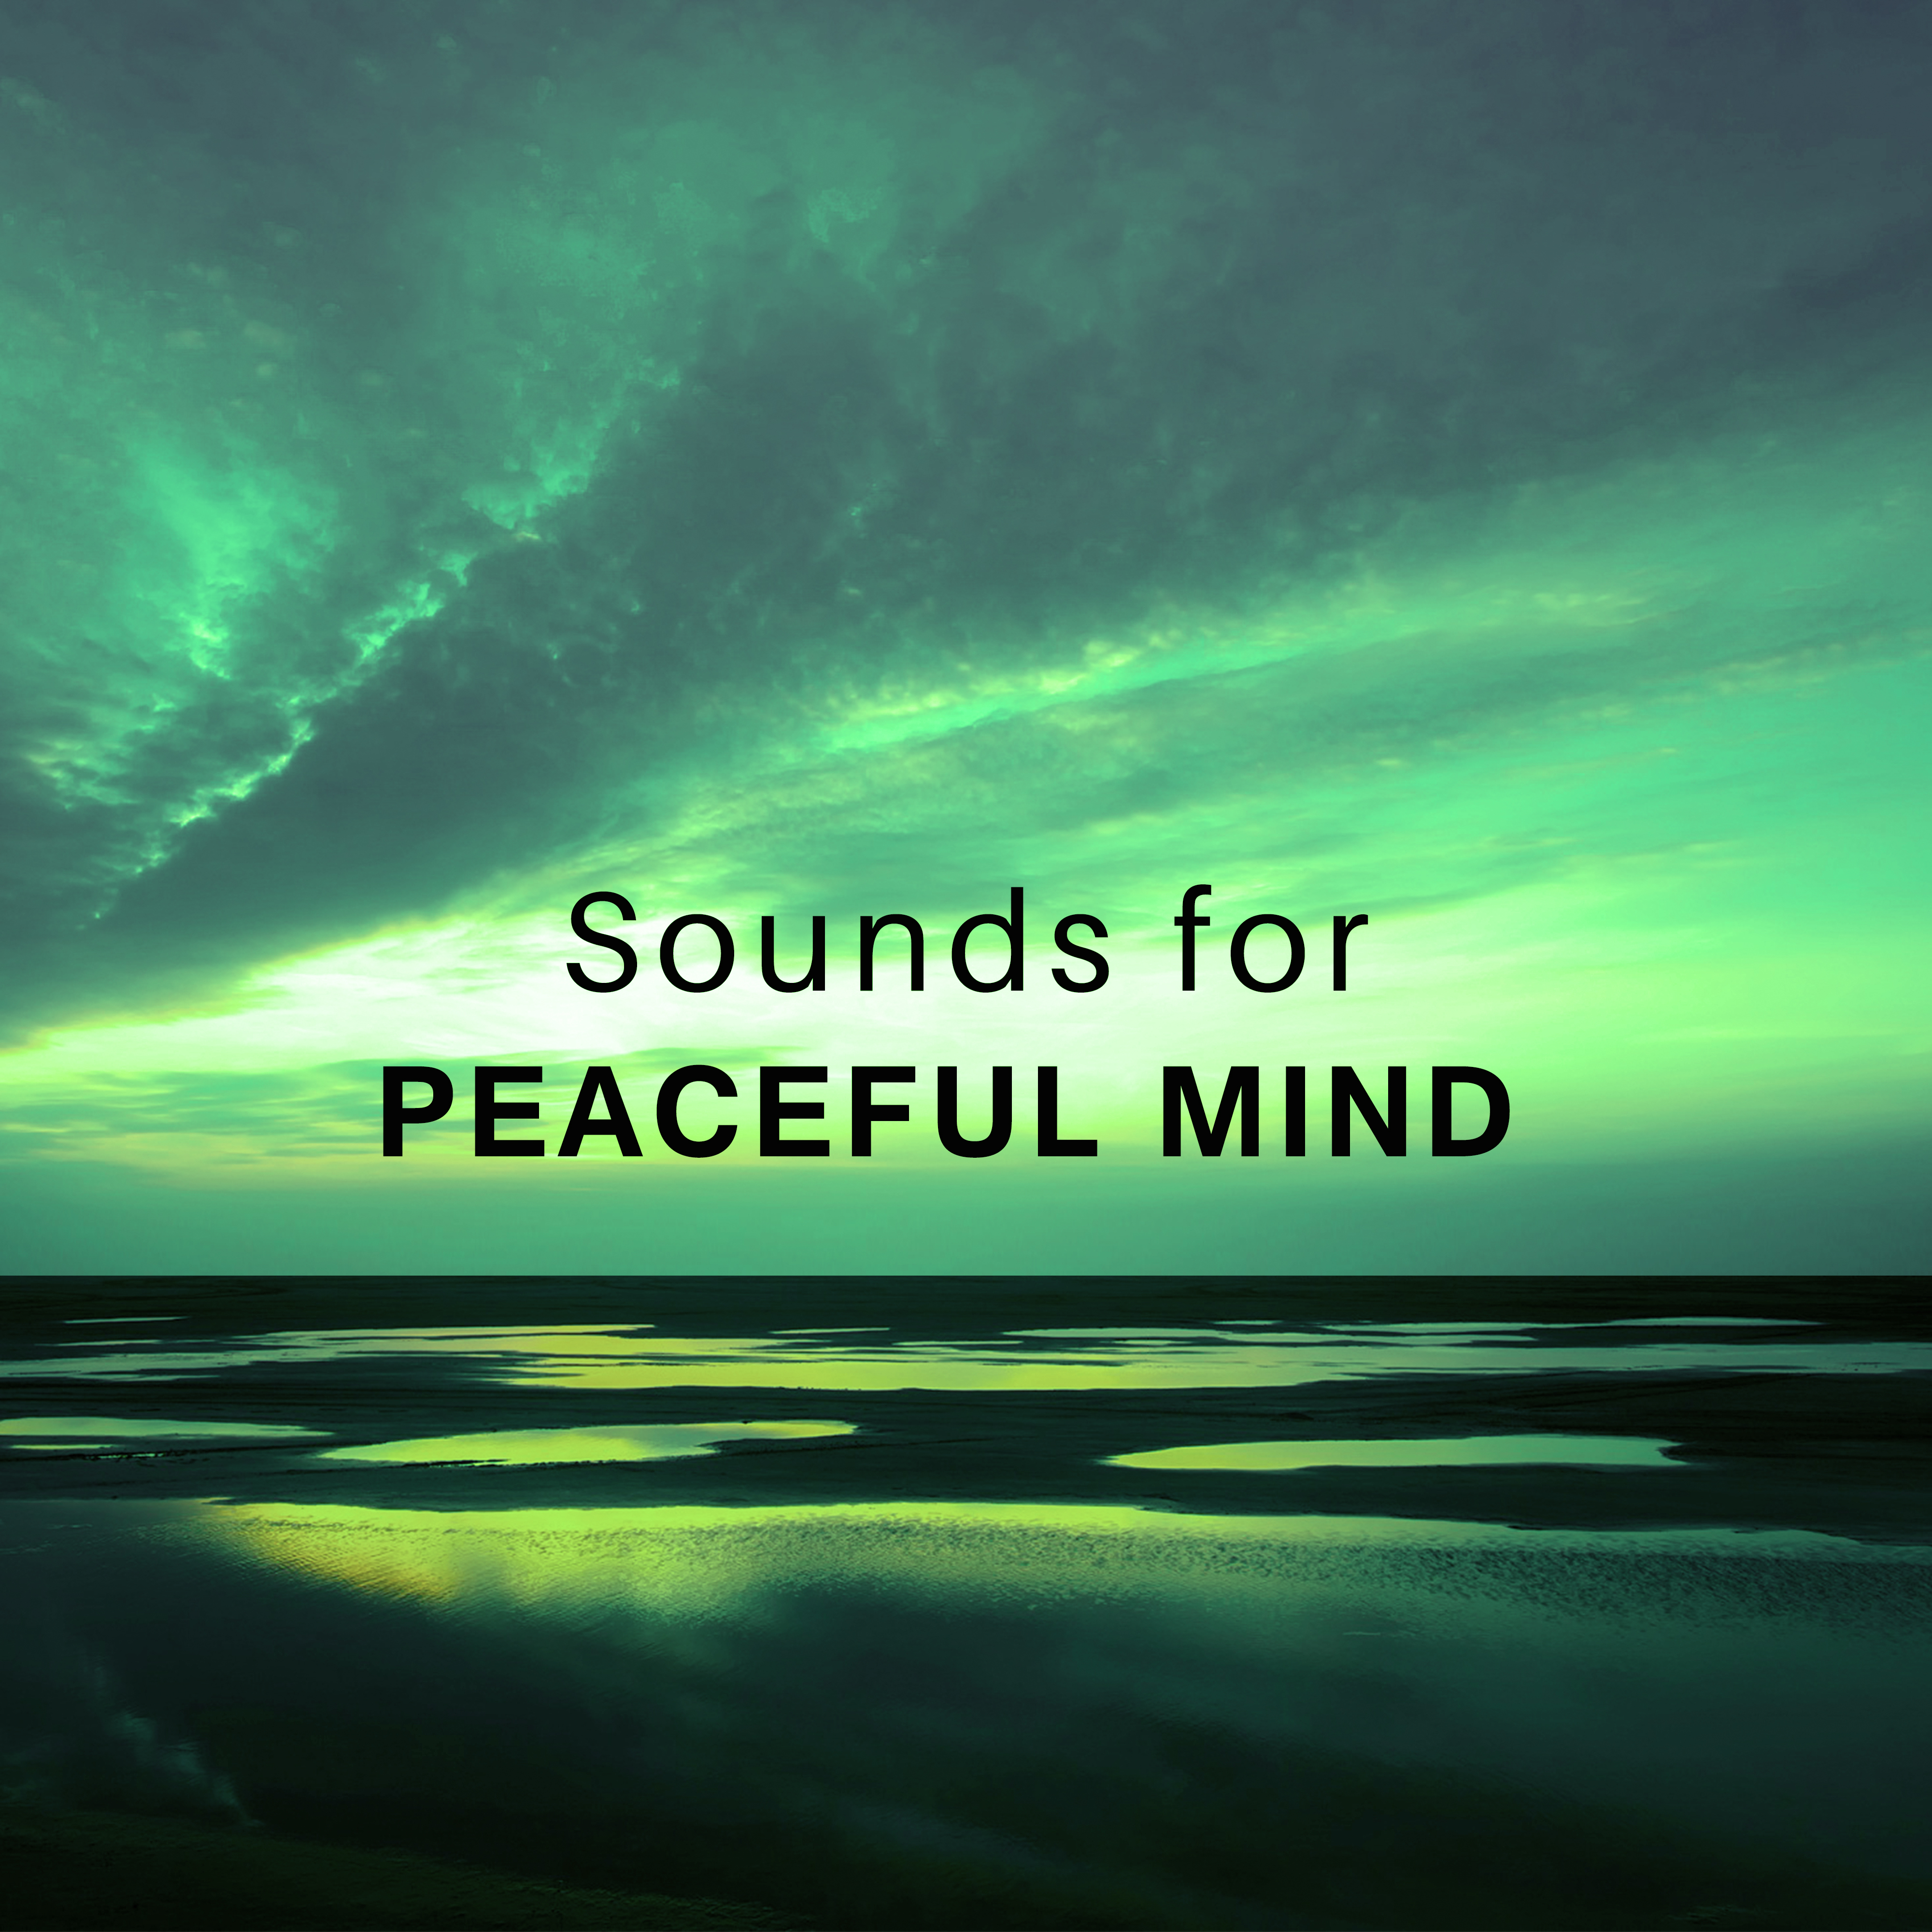 Sounds for Peaceful Mind  Easy Listening, Nature Waves, New Age Calmness, Soul Rest